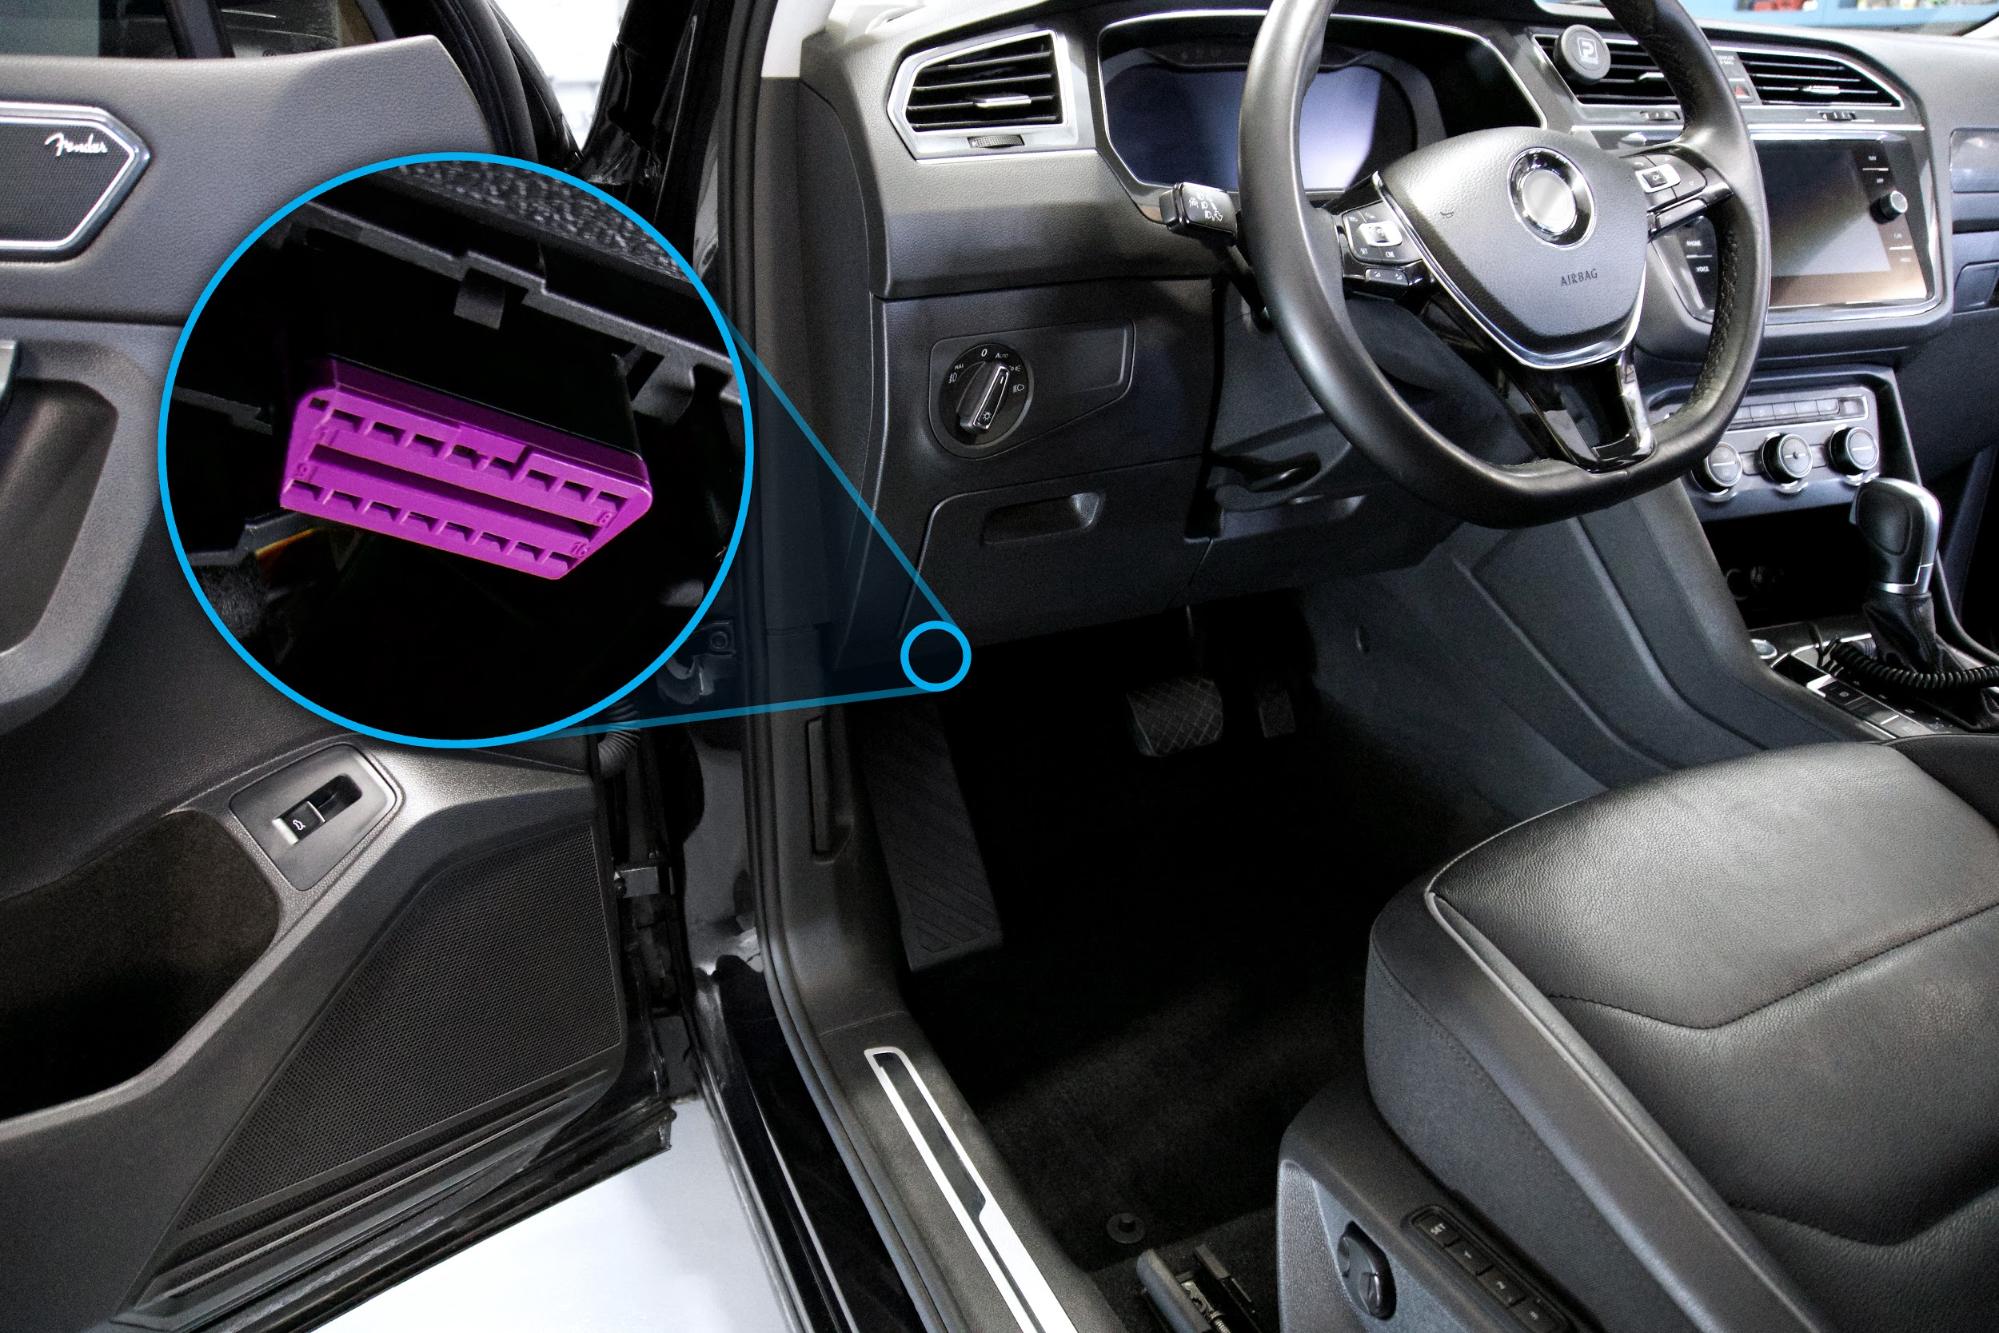 What is OBDII? History of on-board diagnostics